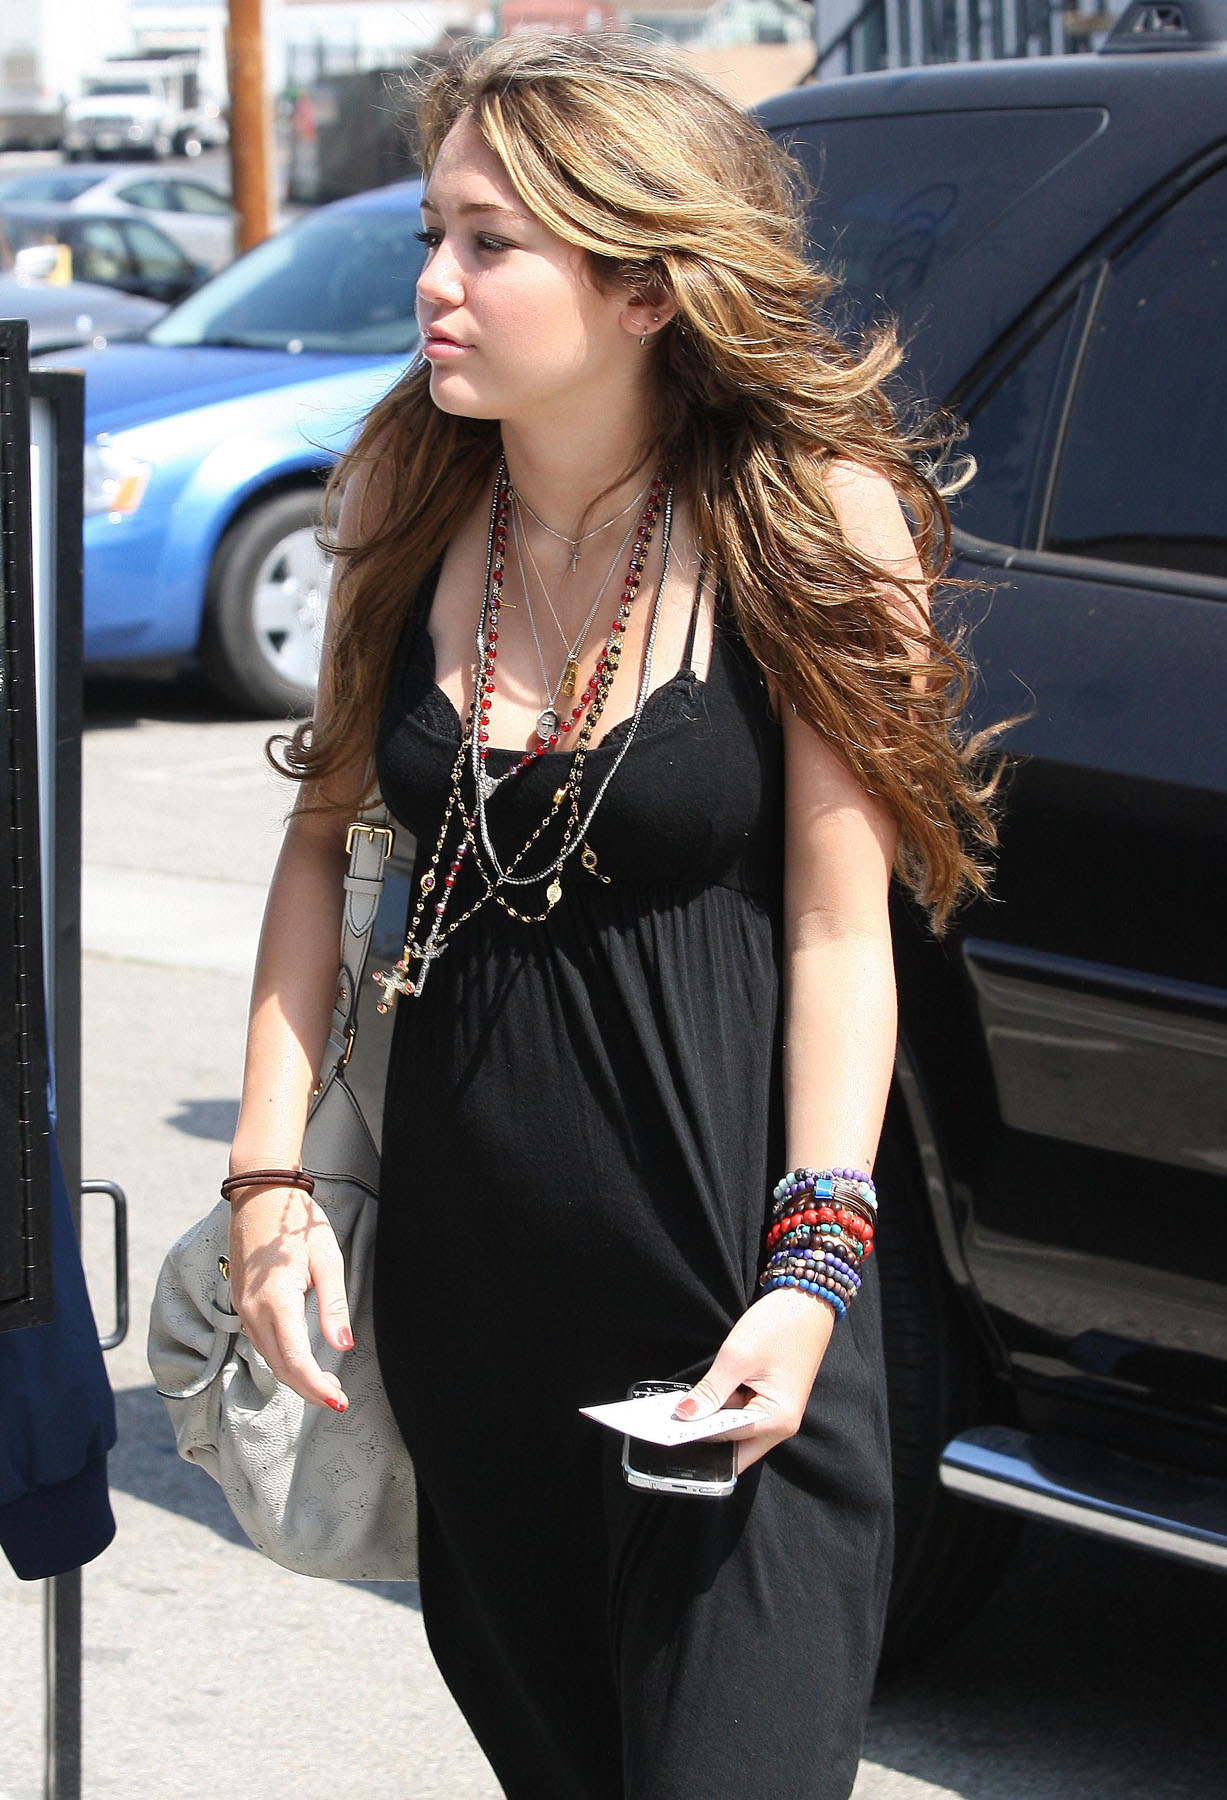 Miley-Cyrus-20090831_Out-n-About-Studio-City_May09_15135.jpg